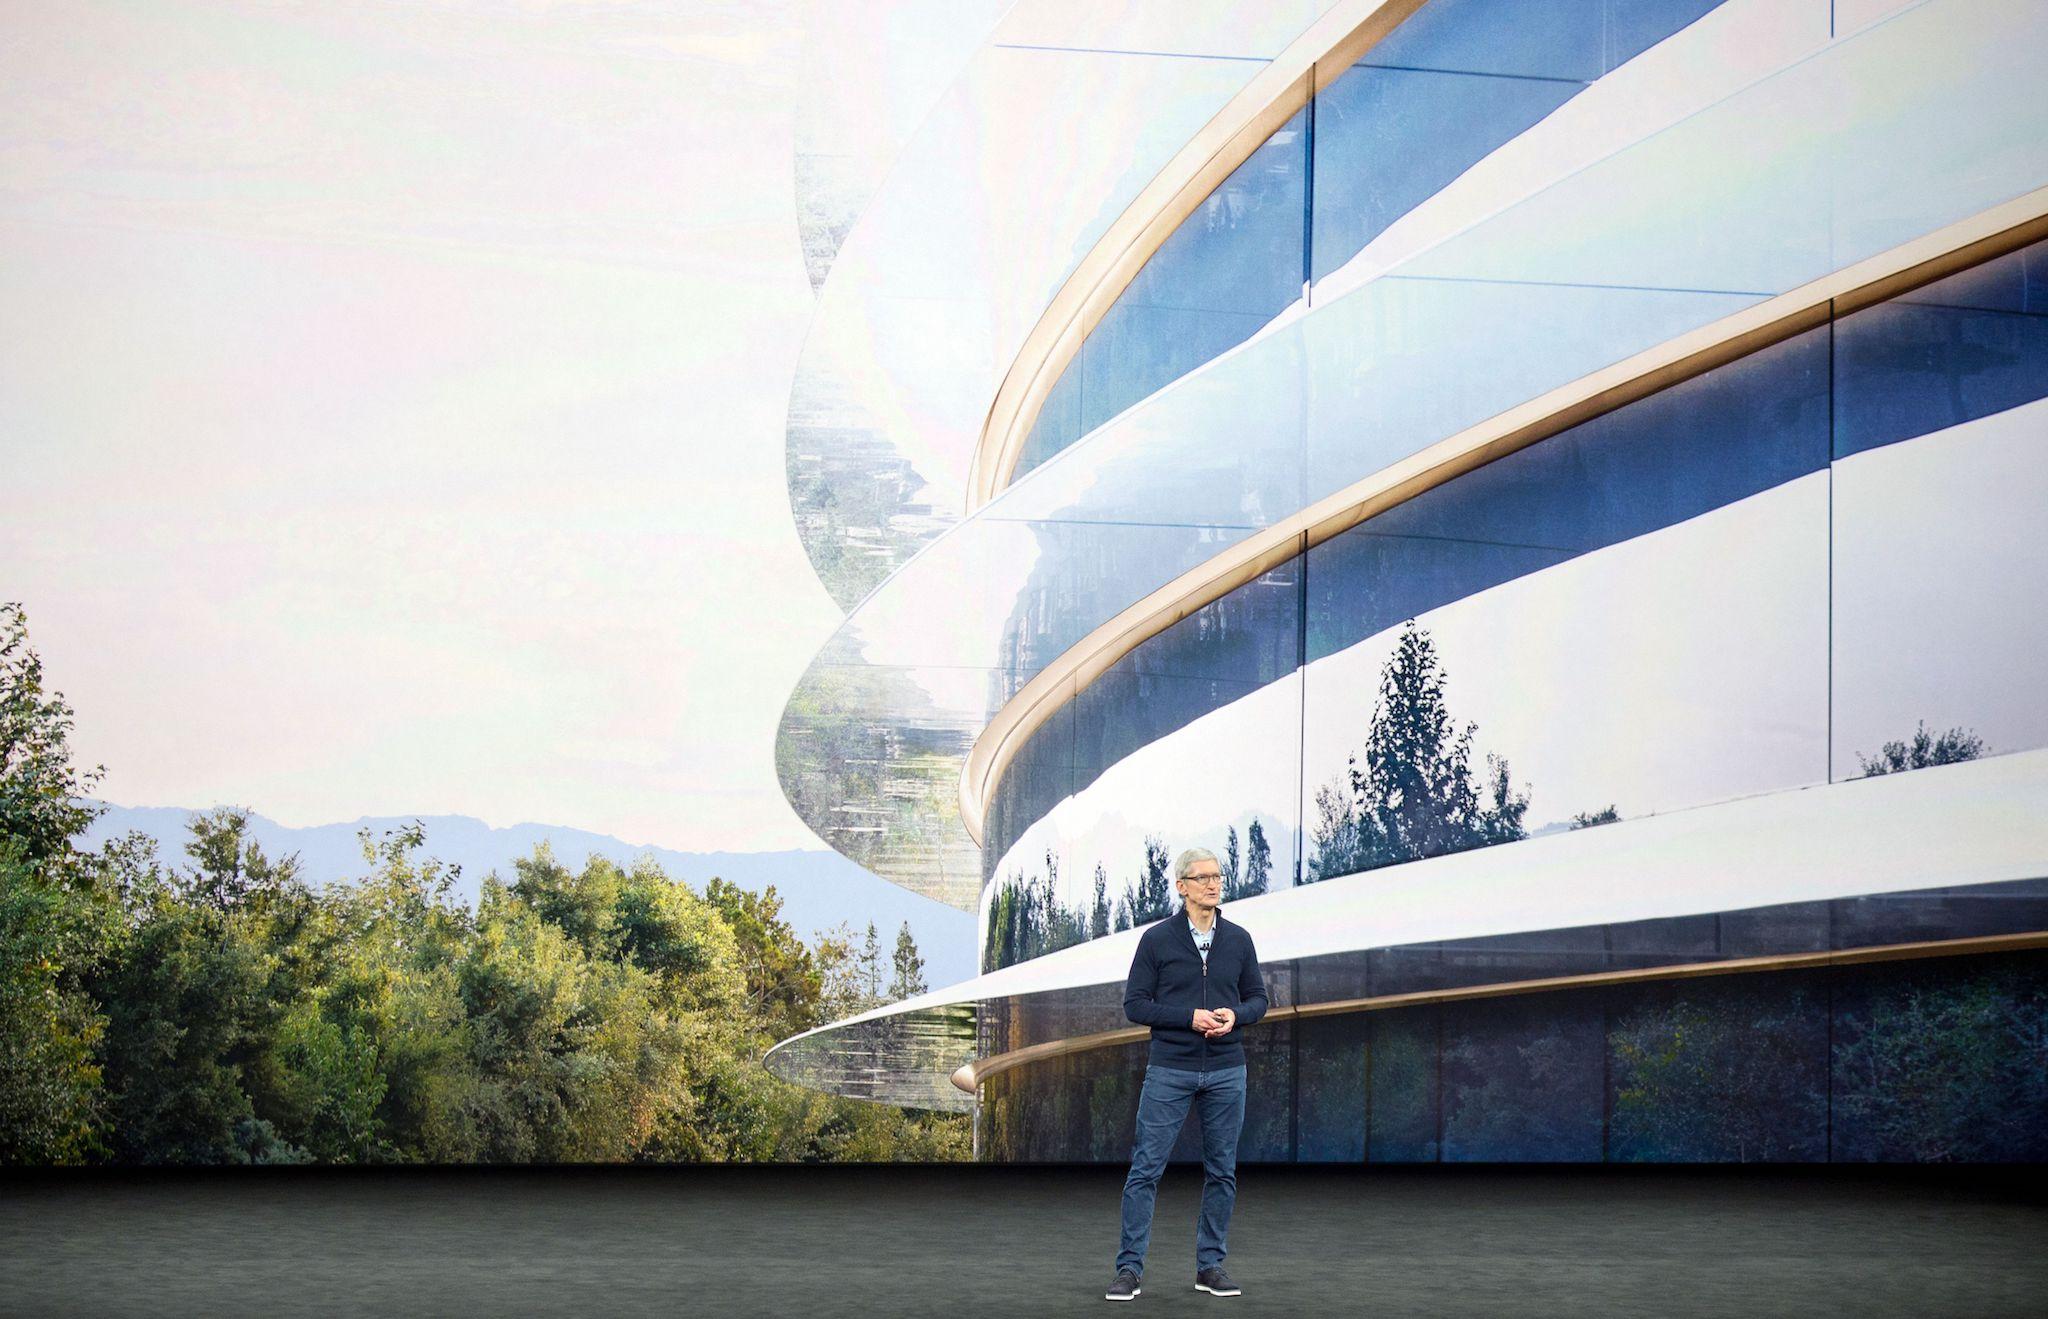 Apple CEO Tim Cook speaks about the new Apple headquarters during a media event in Cupertino, California on September 12, 2017